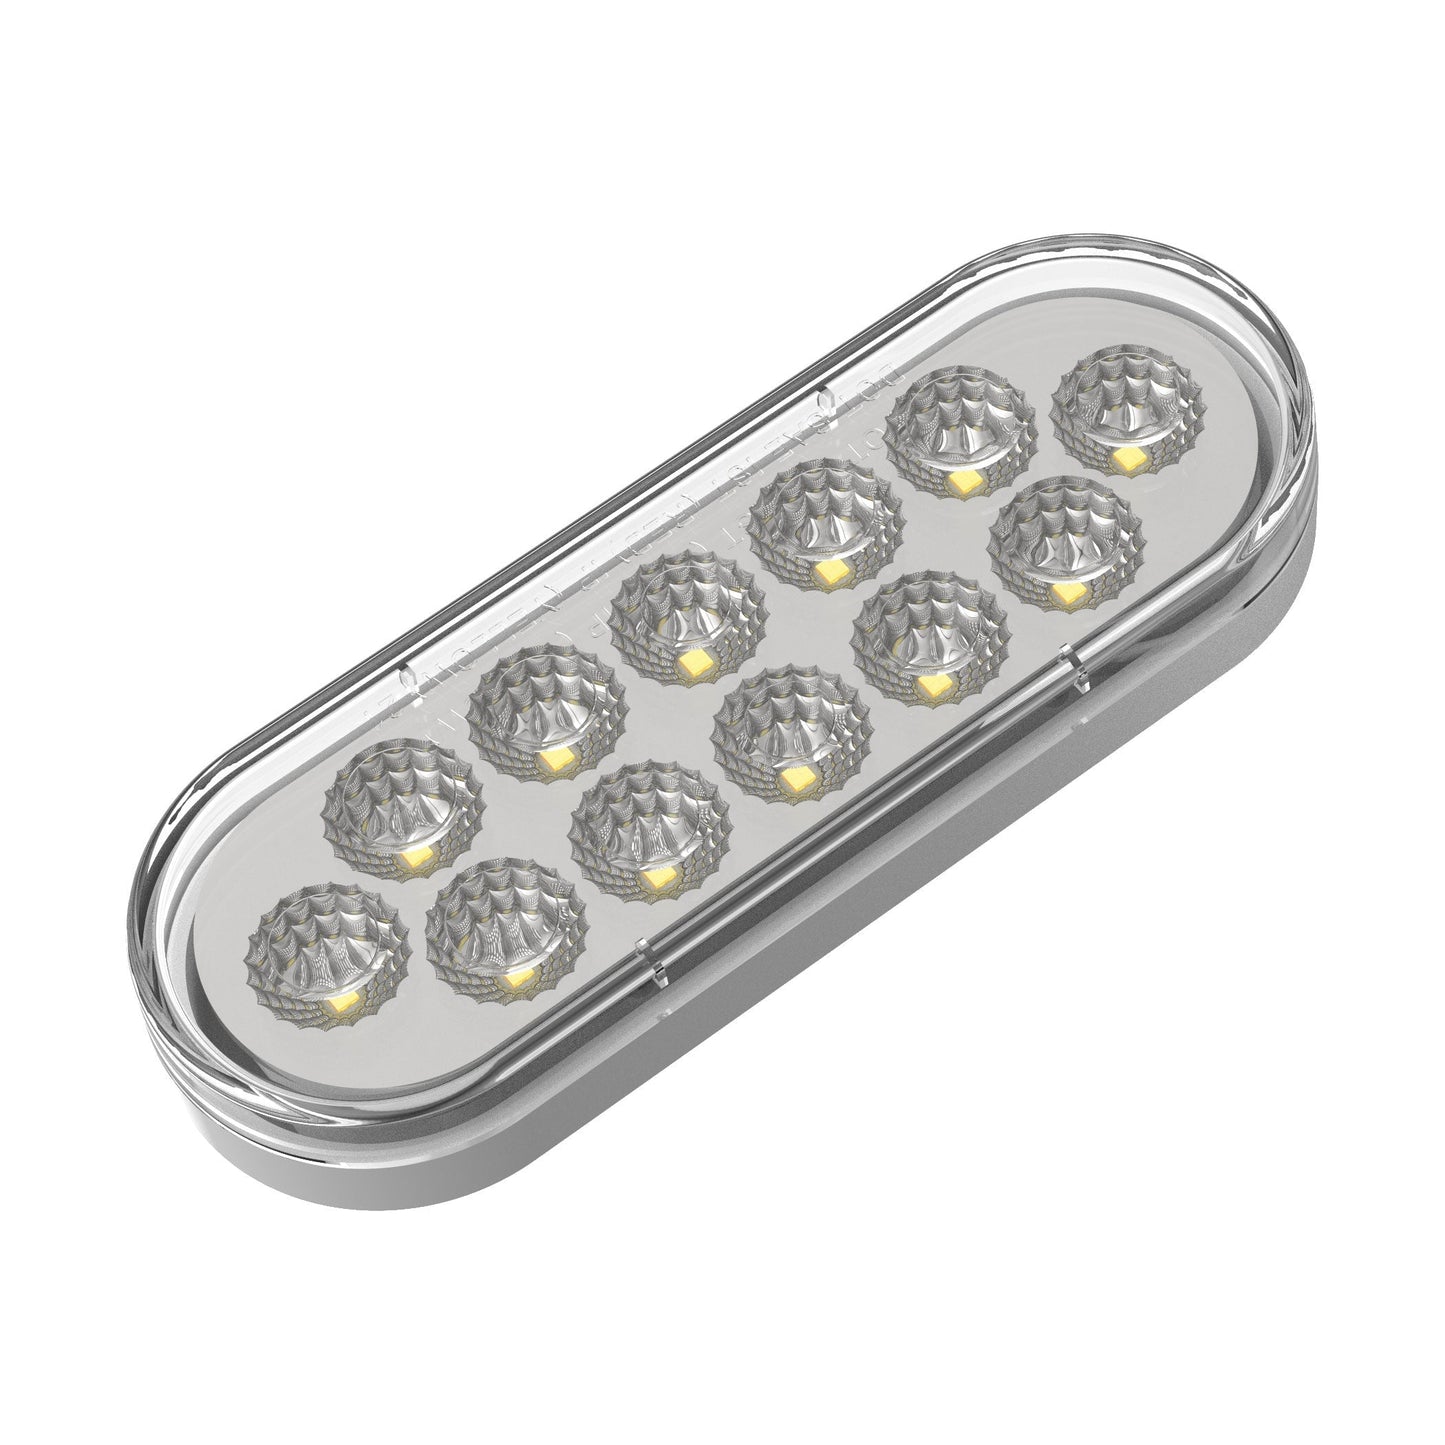 6” Oval Dual Function Multivoltage Led Lights - Red & Ambar Led/Clear Lens | F238711